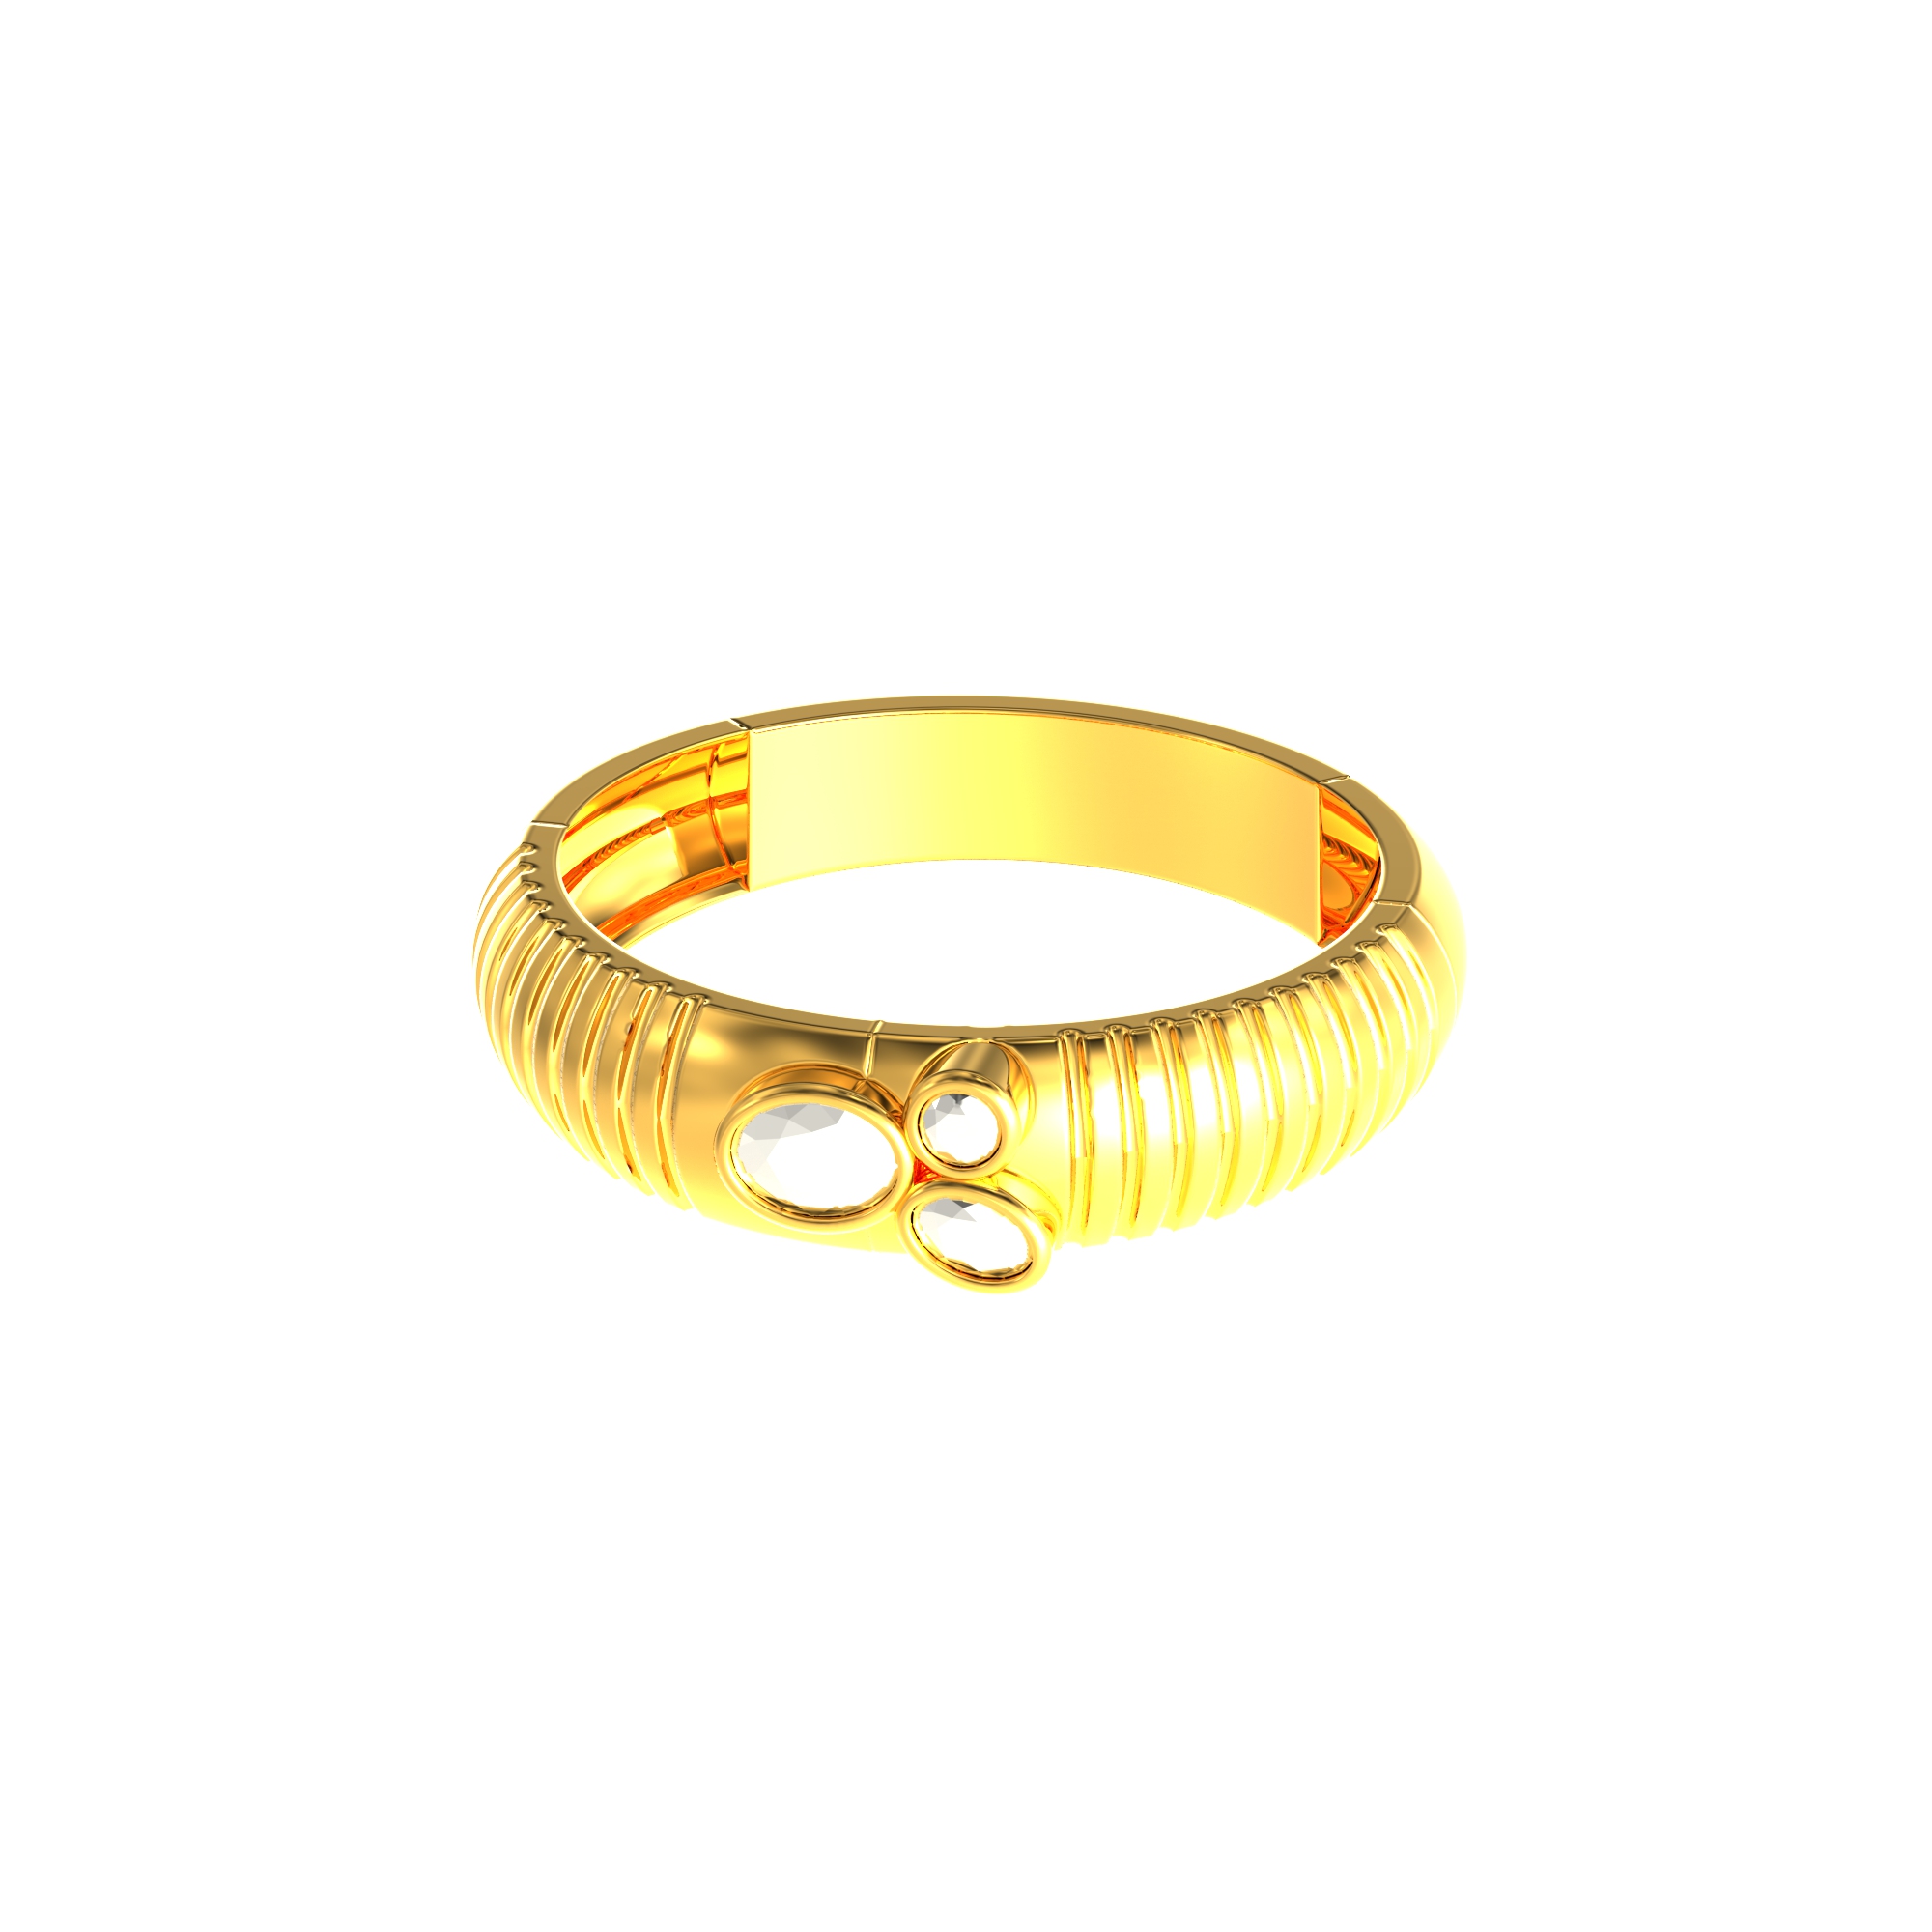 Gents Gold Ring with Geometric design